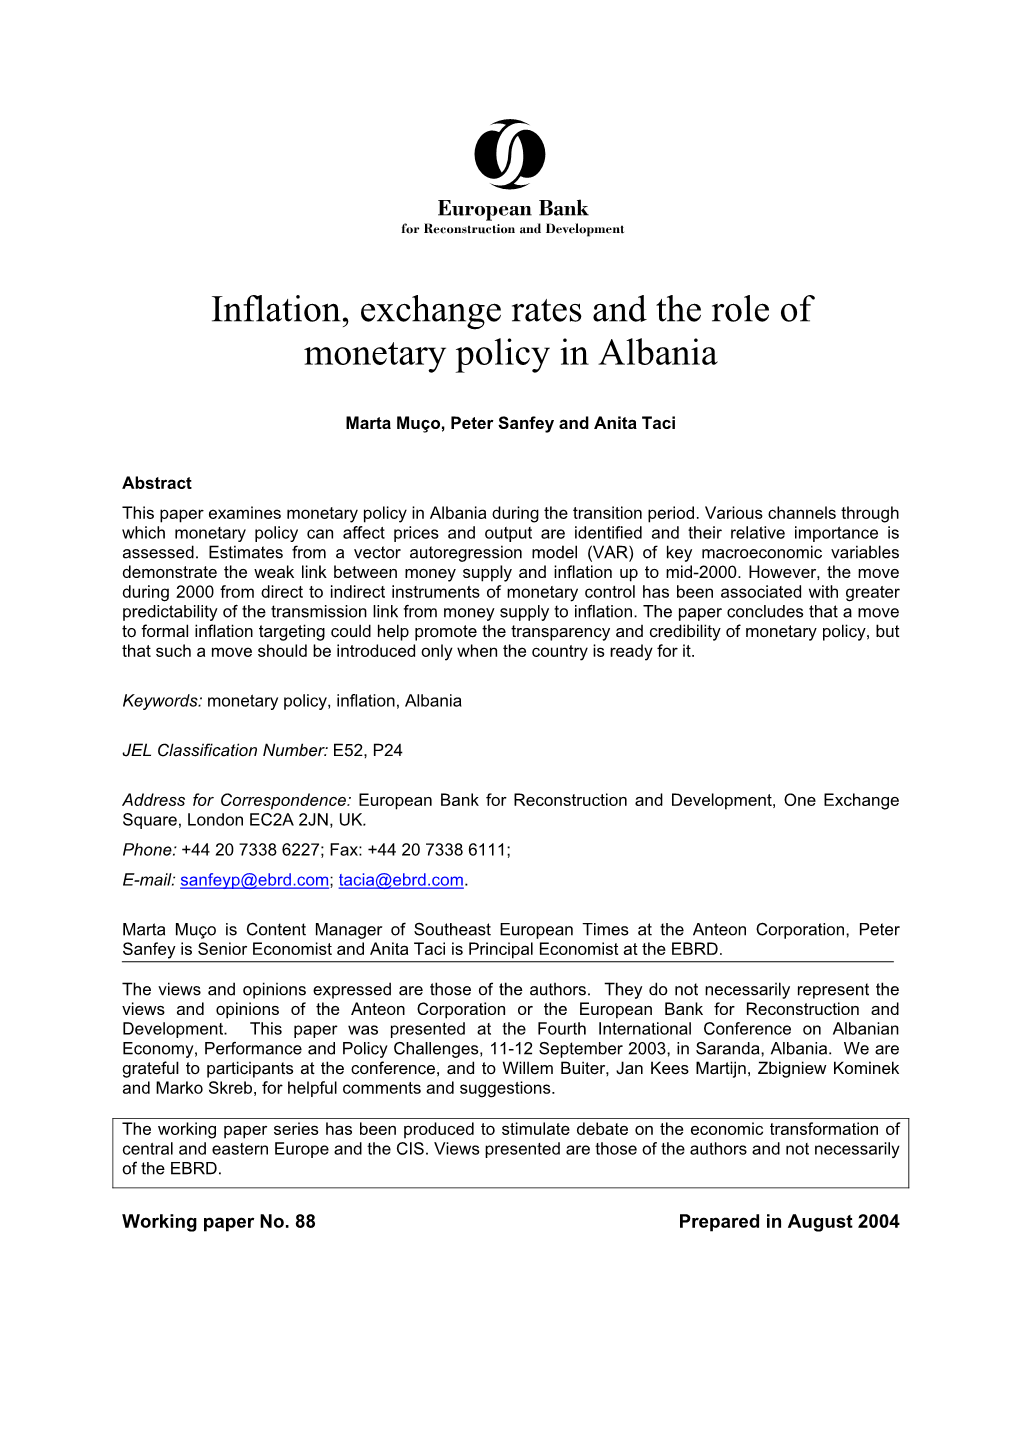 Inflation, Exchange Rates and the Role of Monetary Policy in Albania